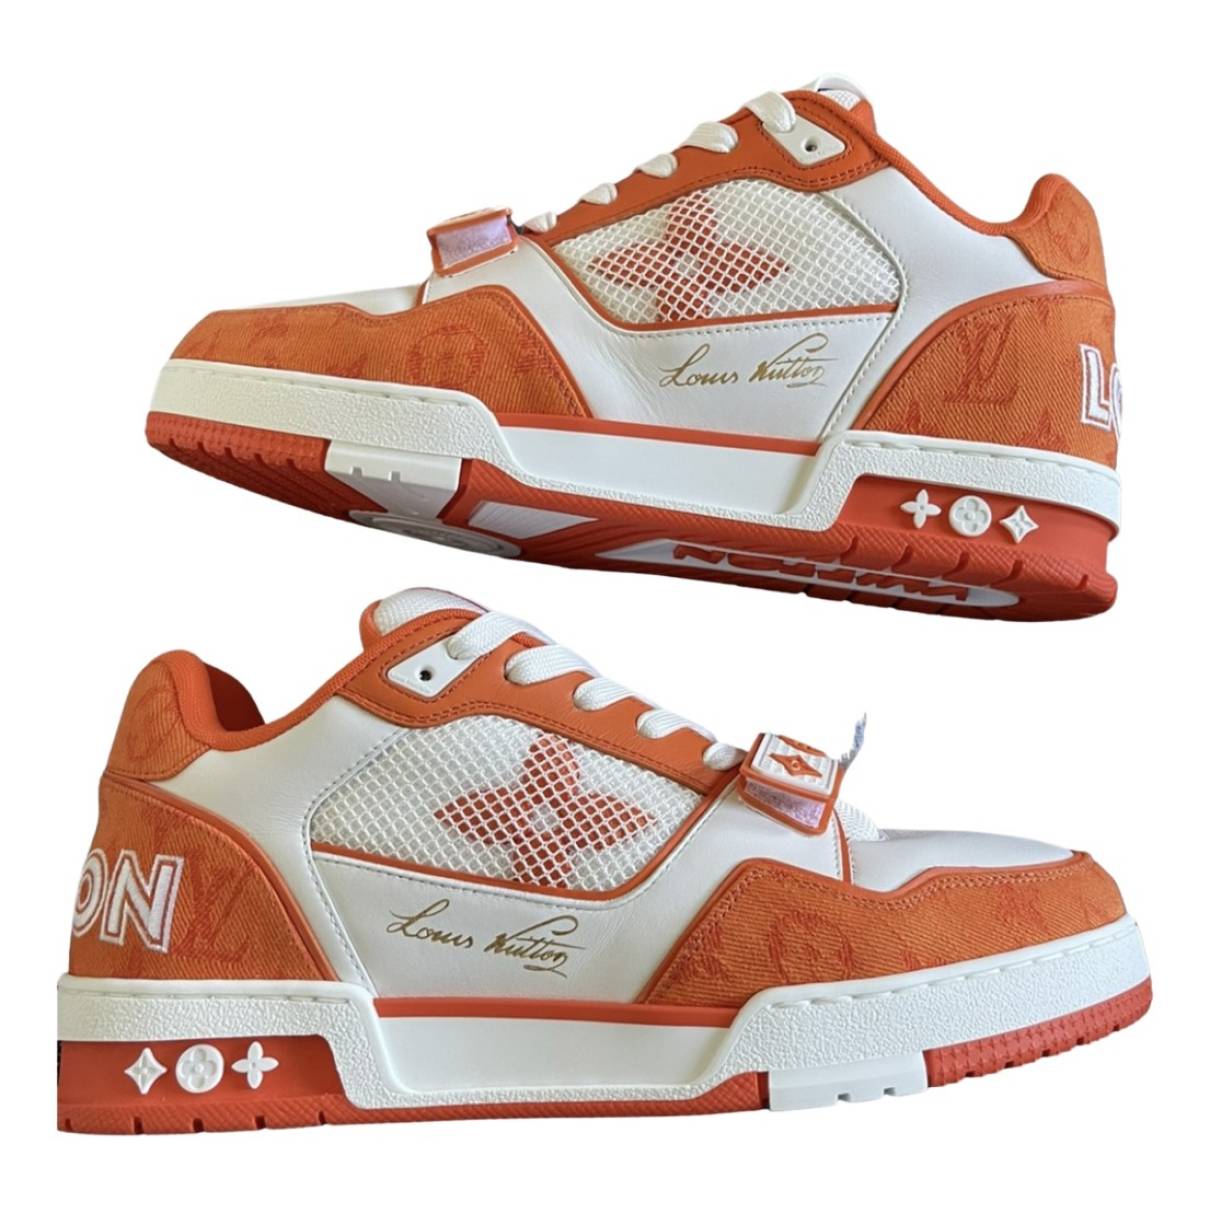 Lv trainer low trainers Louis Vuitton Orange size 8 UK in Other